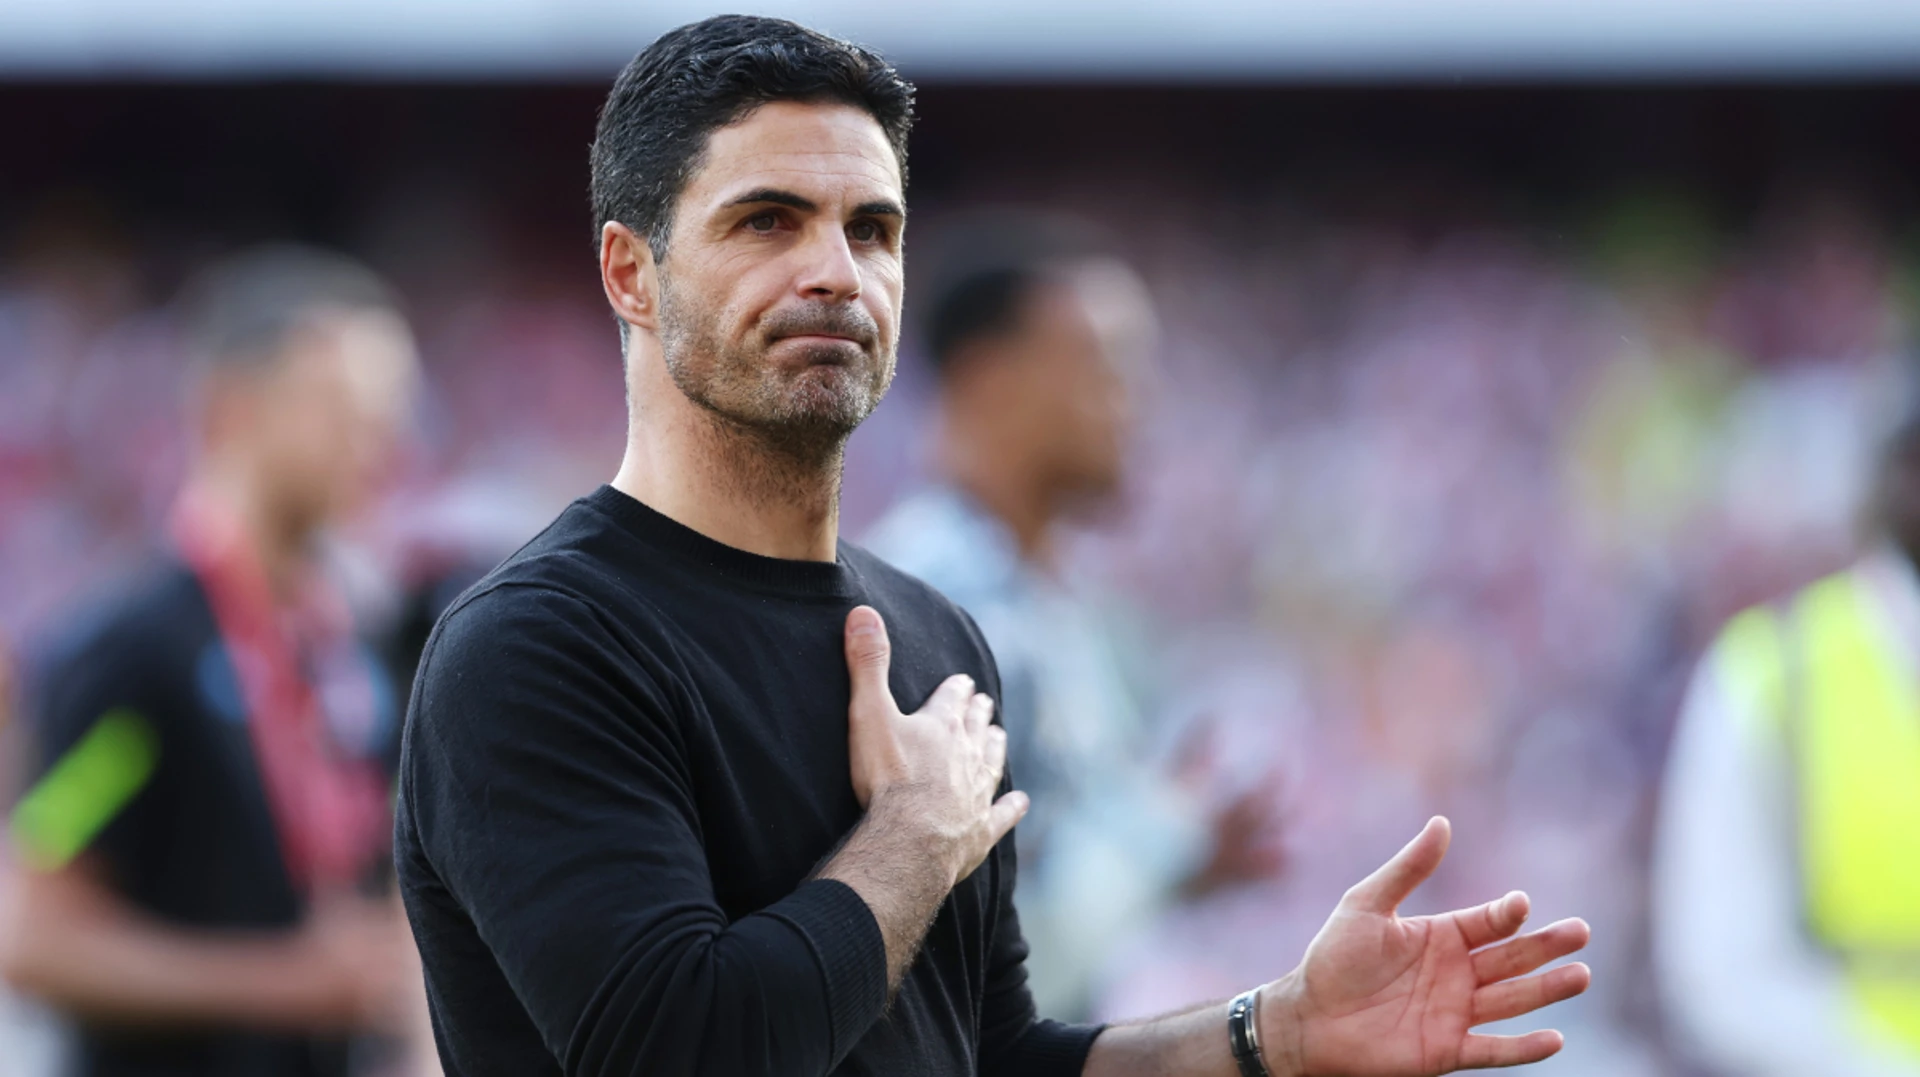 Arteta says he expects to extend Arsenal contract